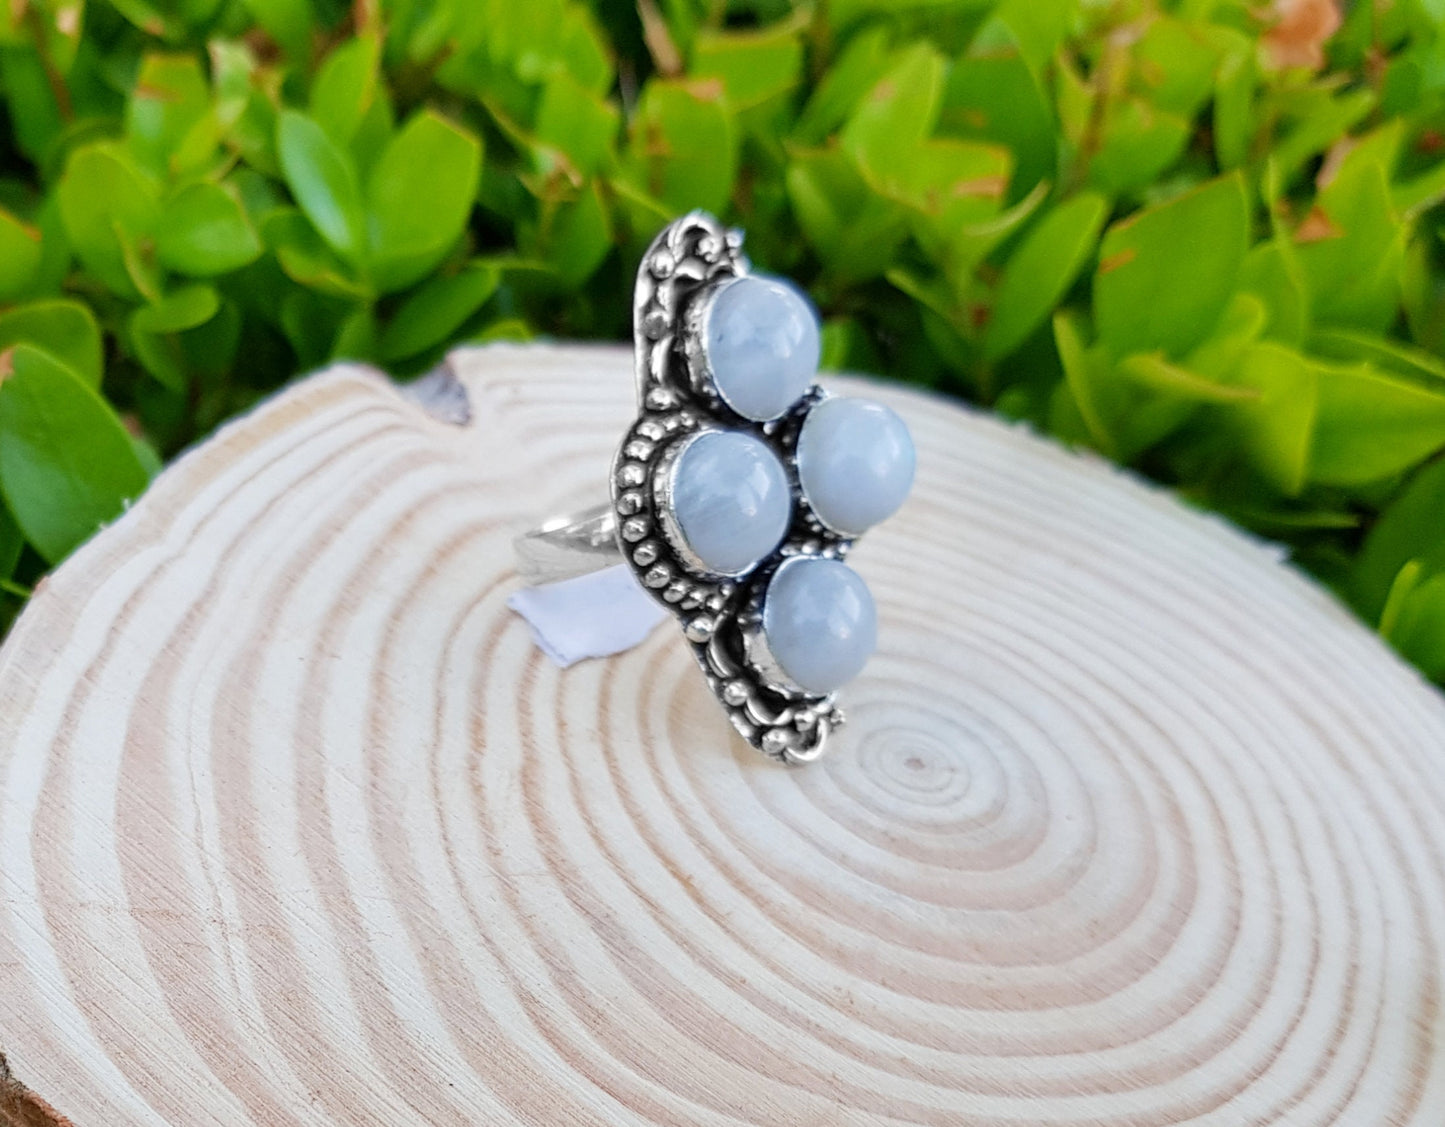 Moonstone Statement Ring In Sterling Silver Boho Ring Size US 7 GypsyJewelry Unique Gift Geometric Ring